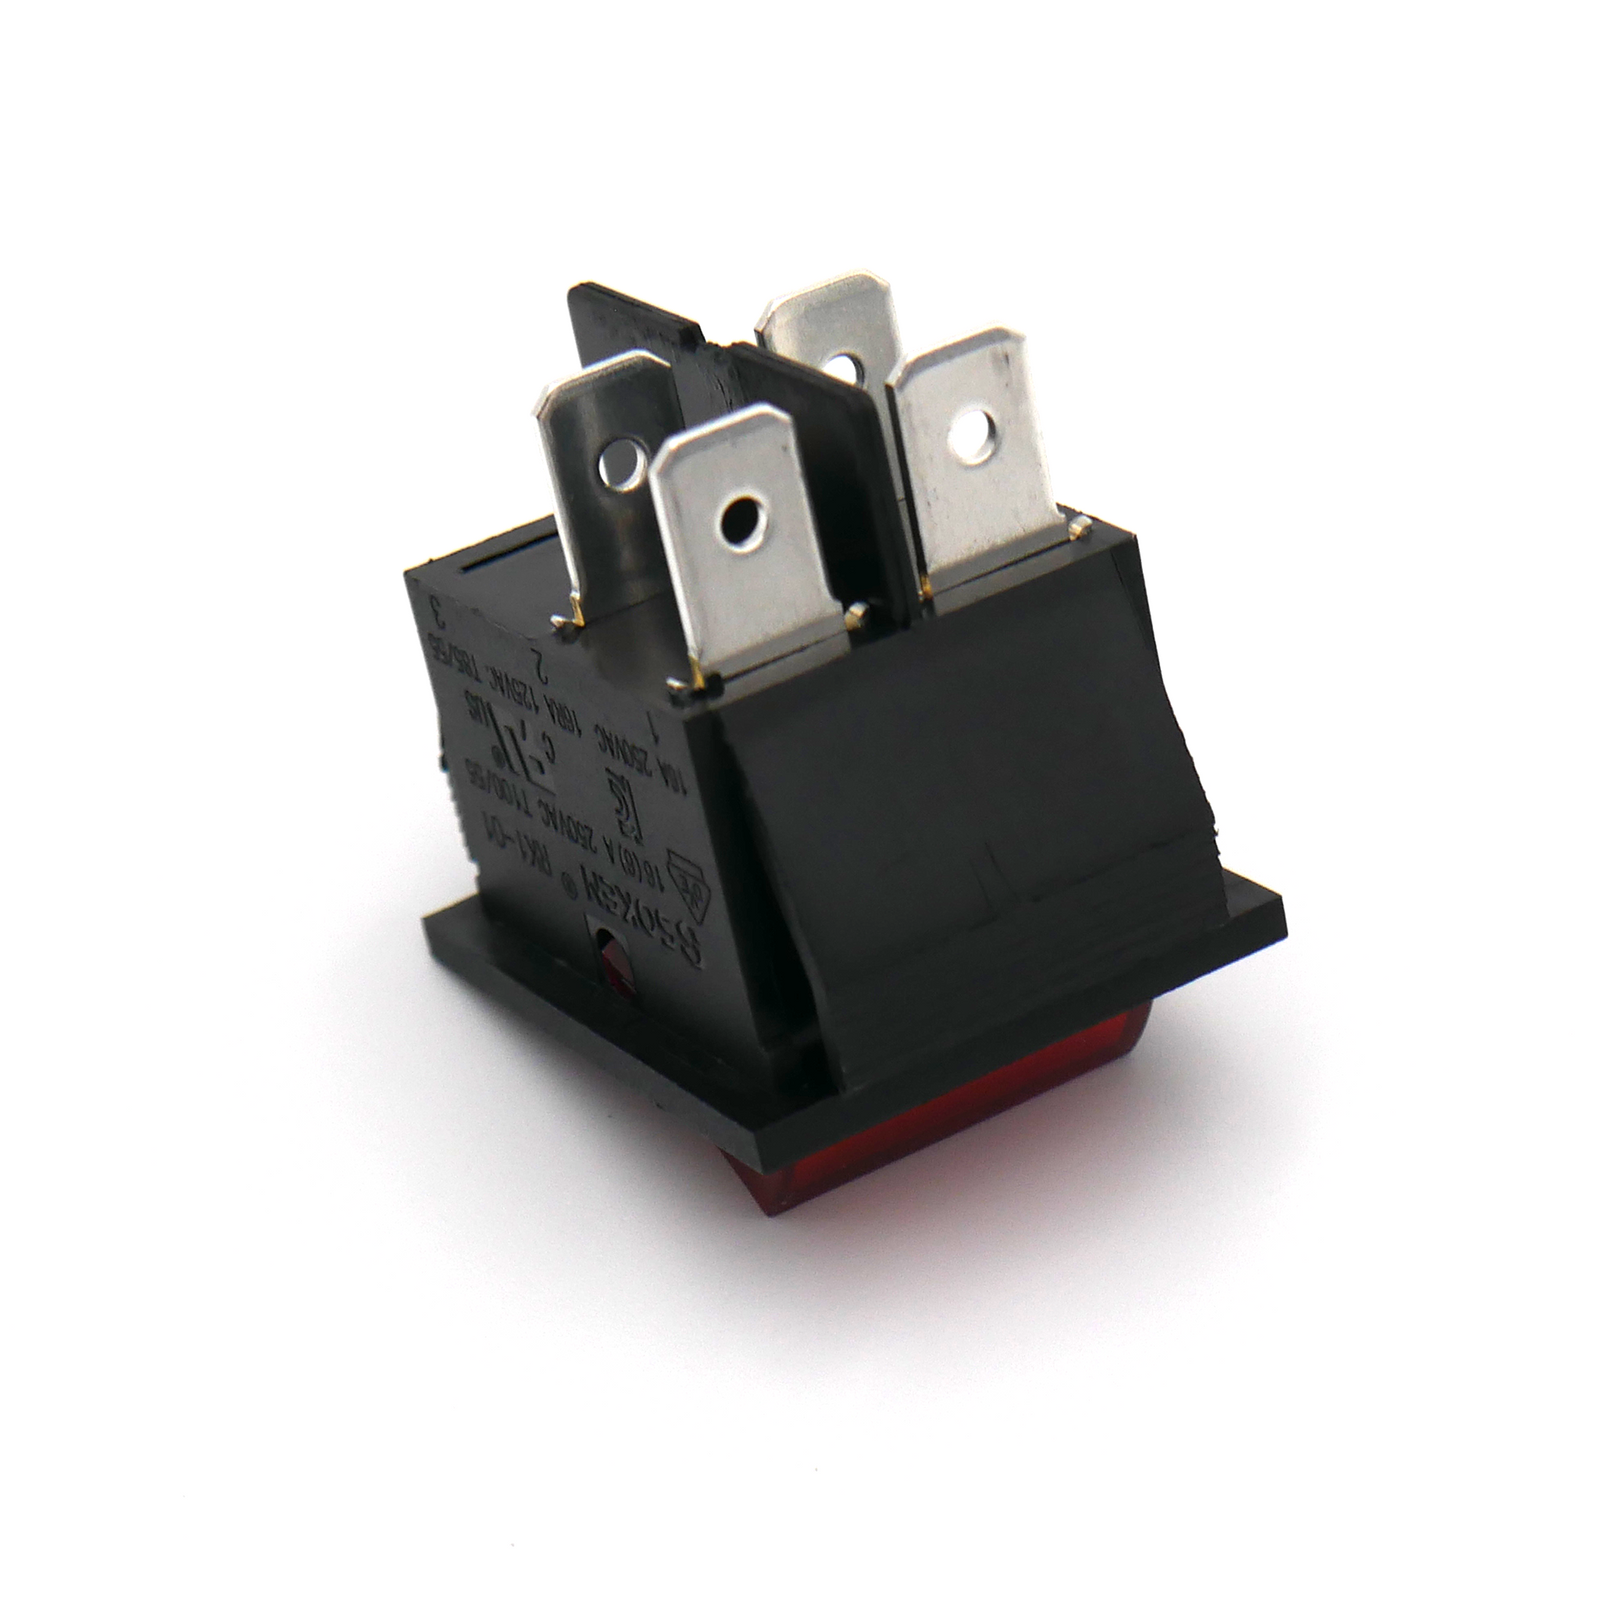 Red rocker switch used for power control on/off